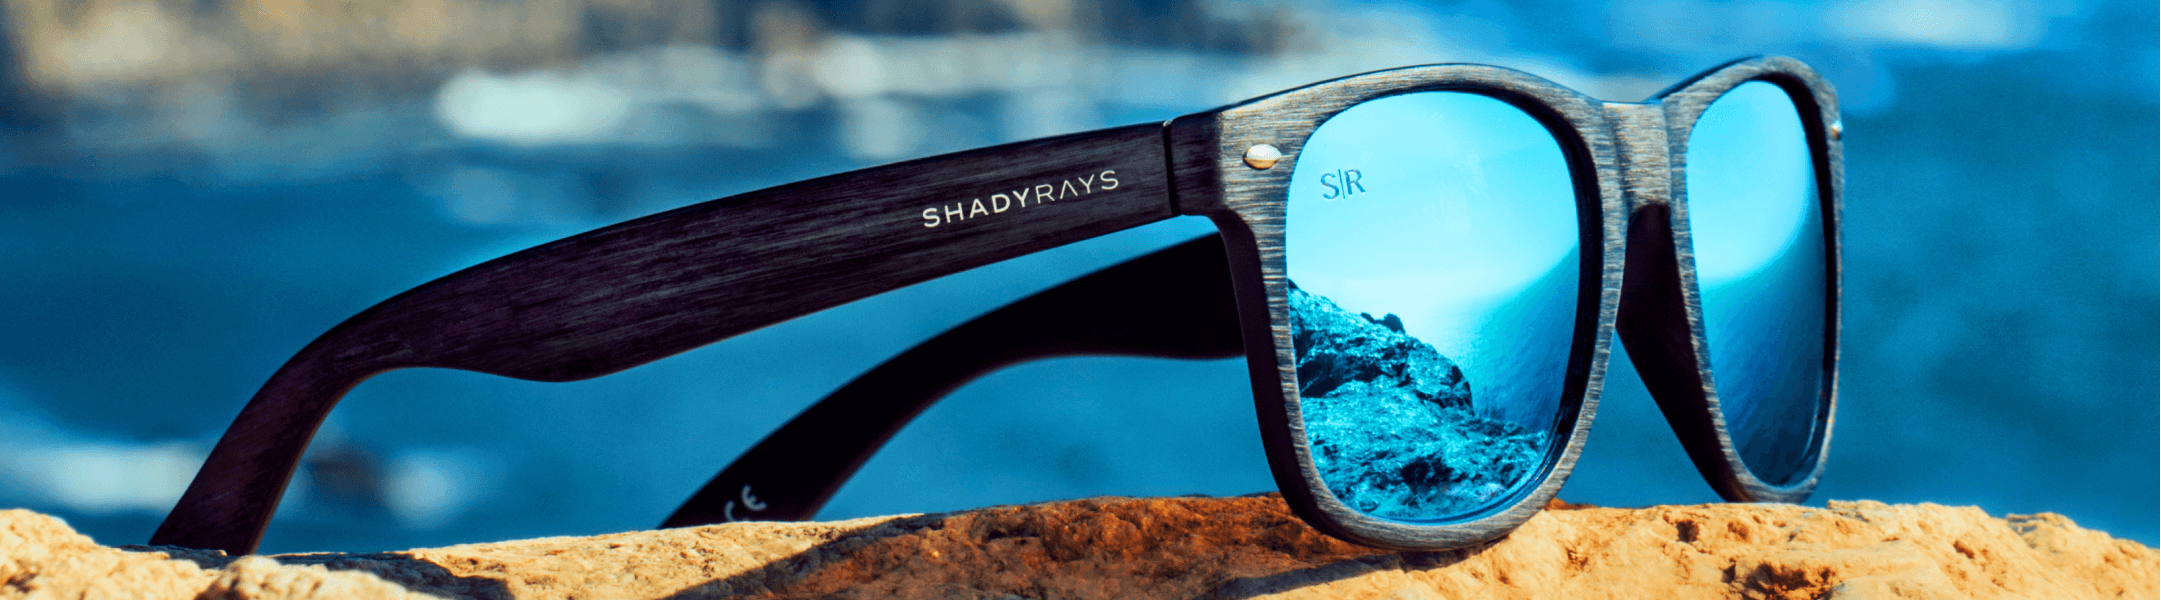 Best Ray-Ban Sunglasses 2020: Where to Buy Ray-Bans on Sale Online